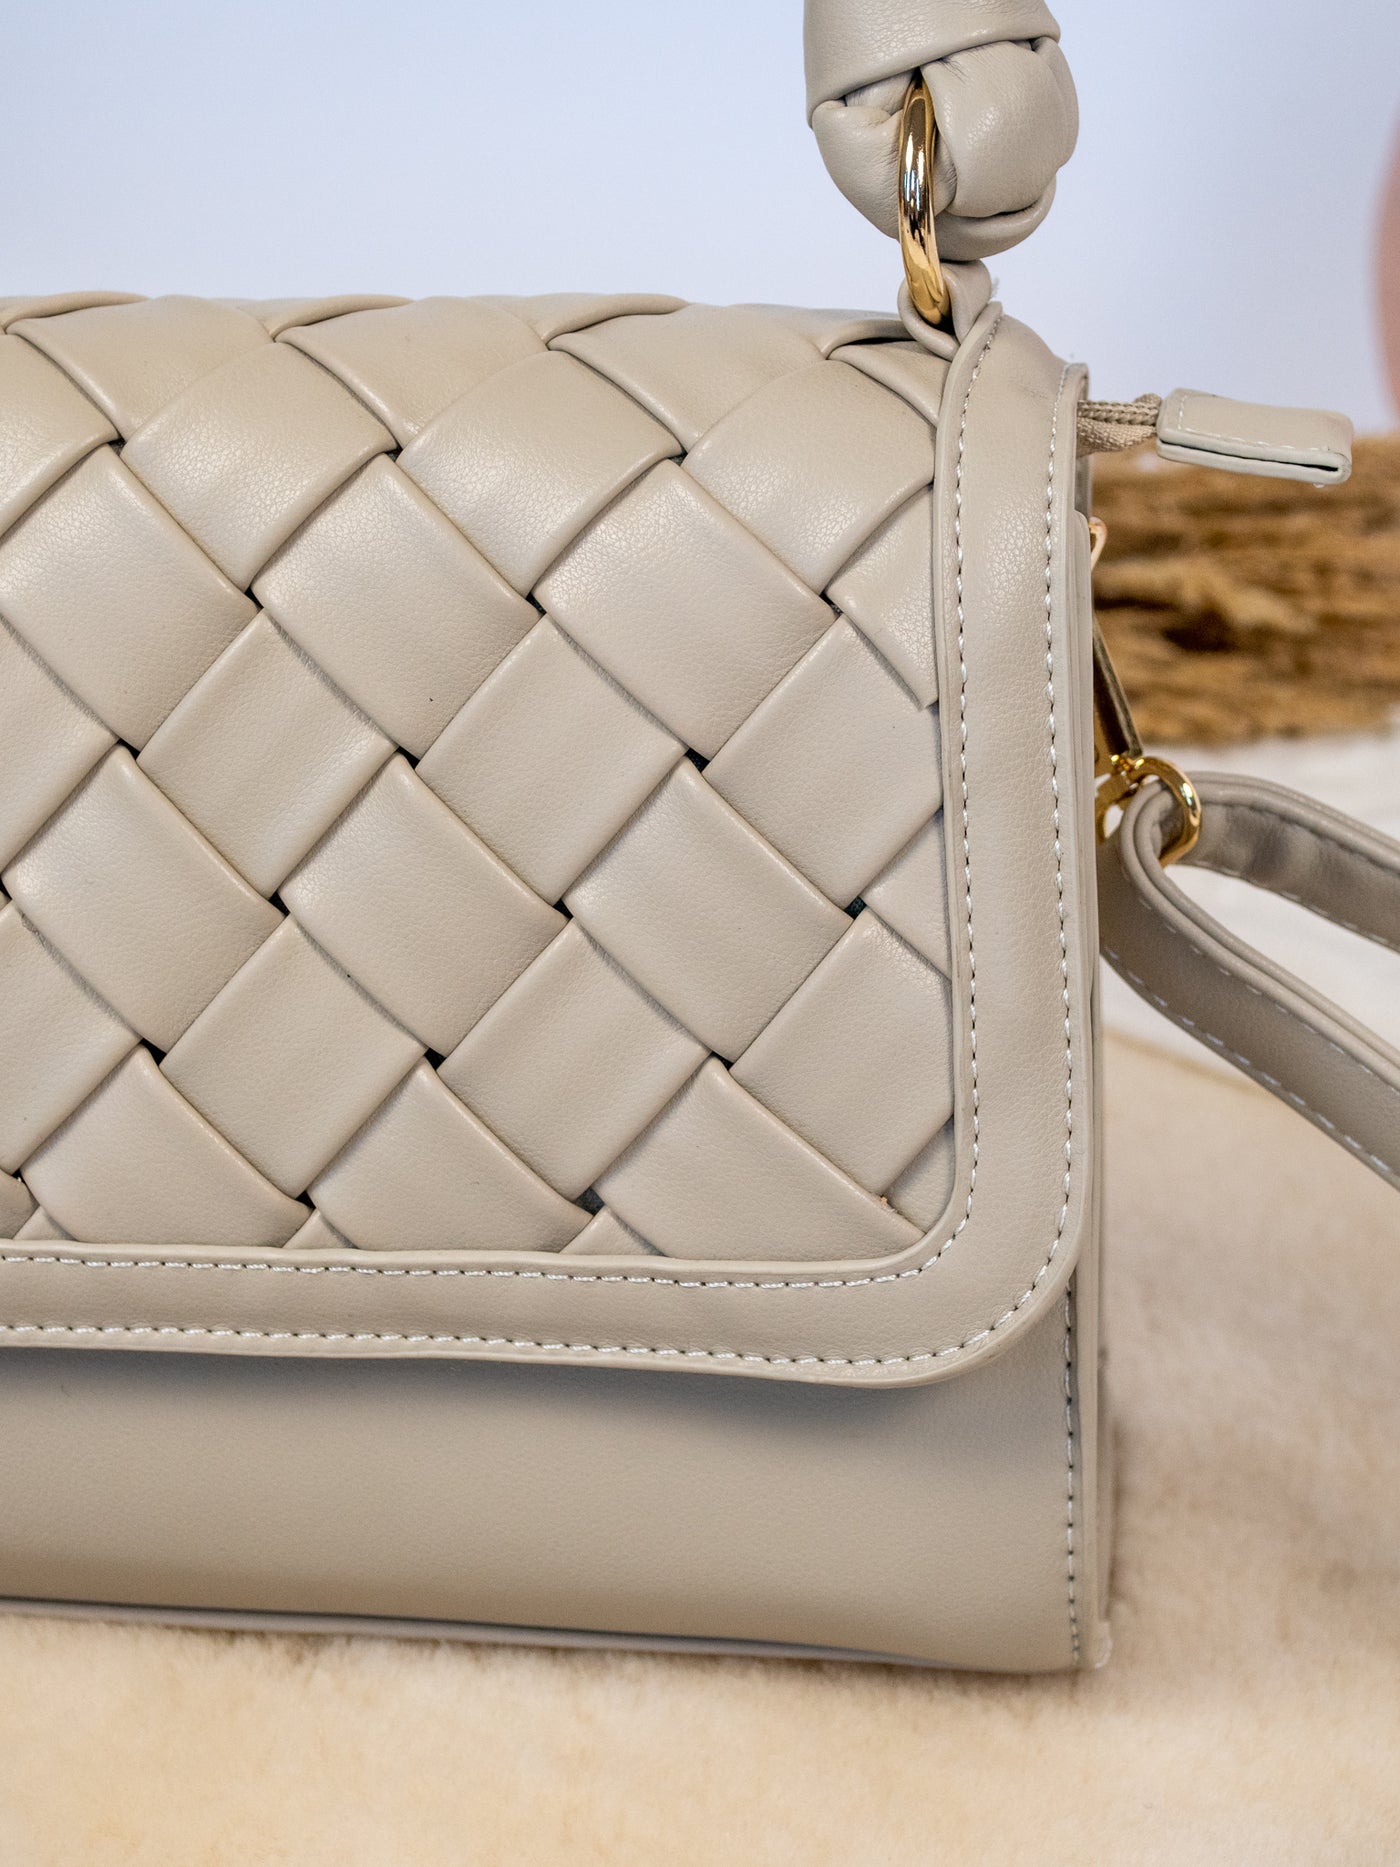 A cream colored purse with an adjustable strap and woven look. It has a braided top handle is cream colored.